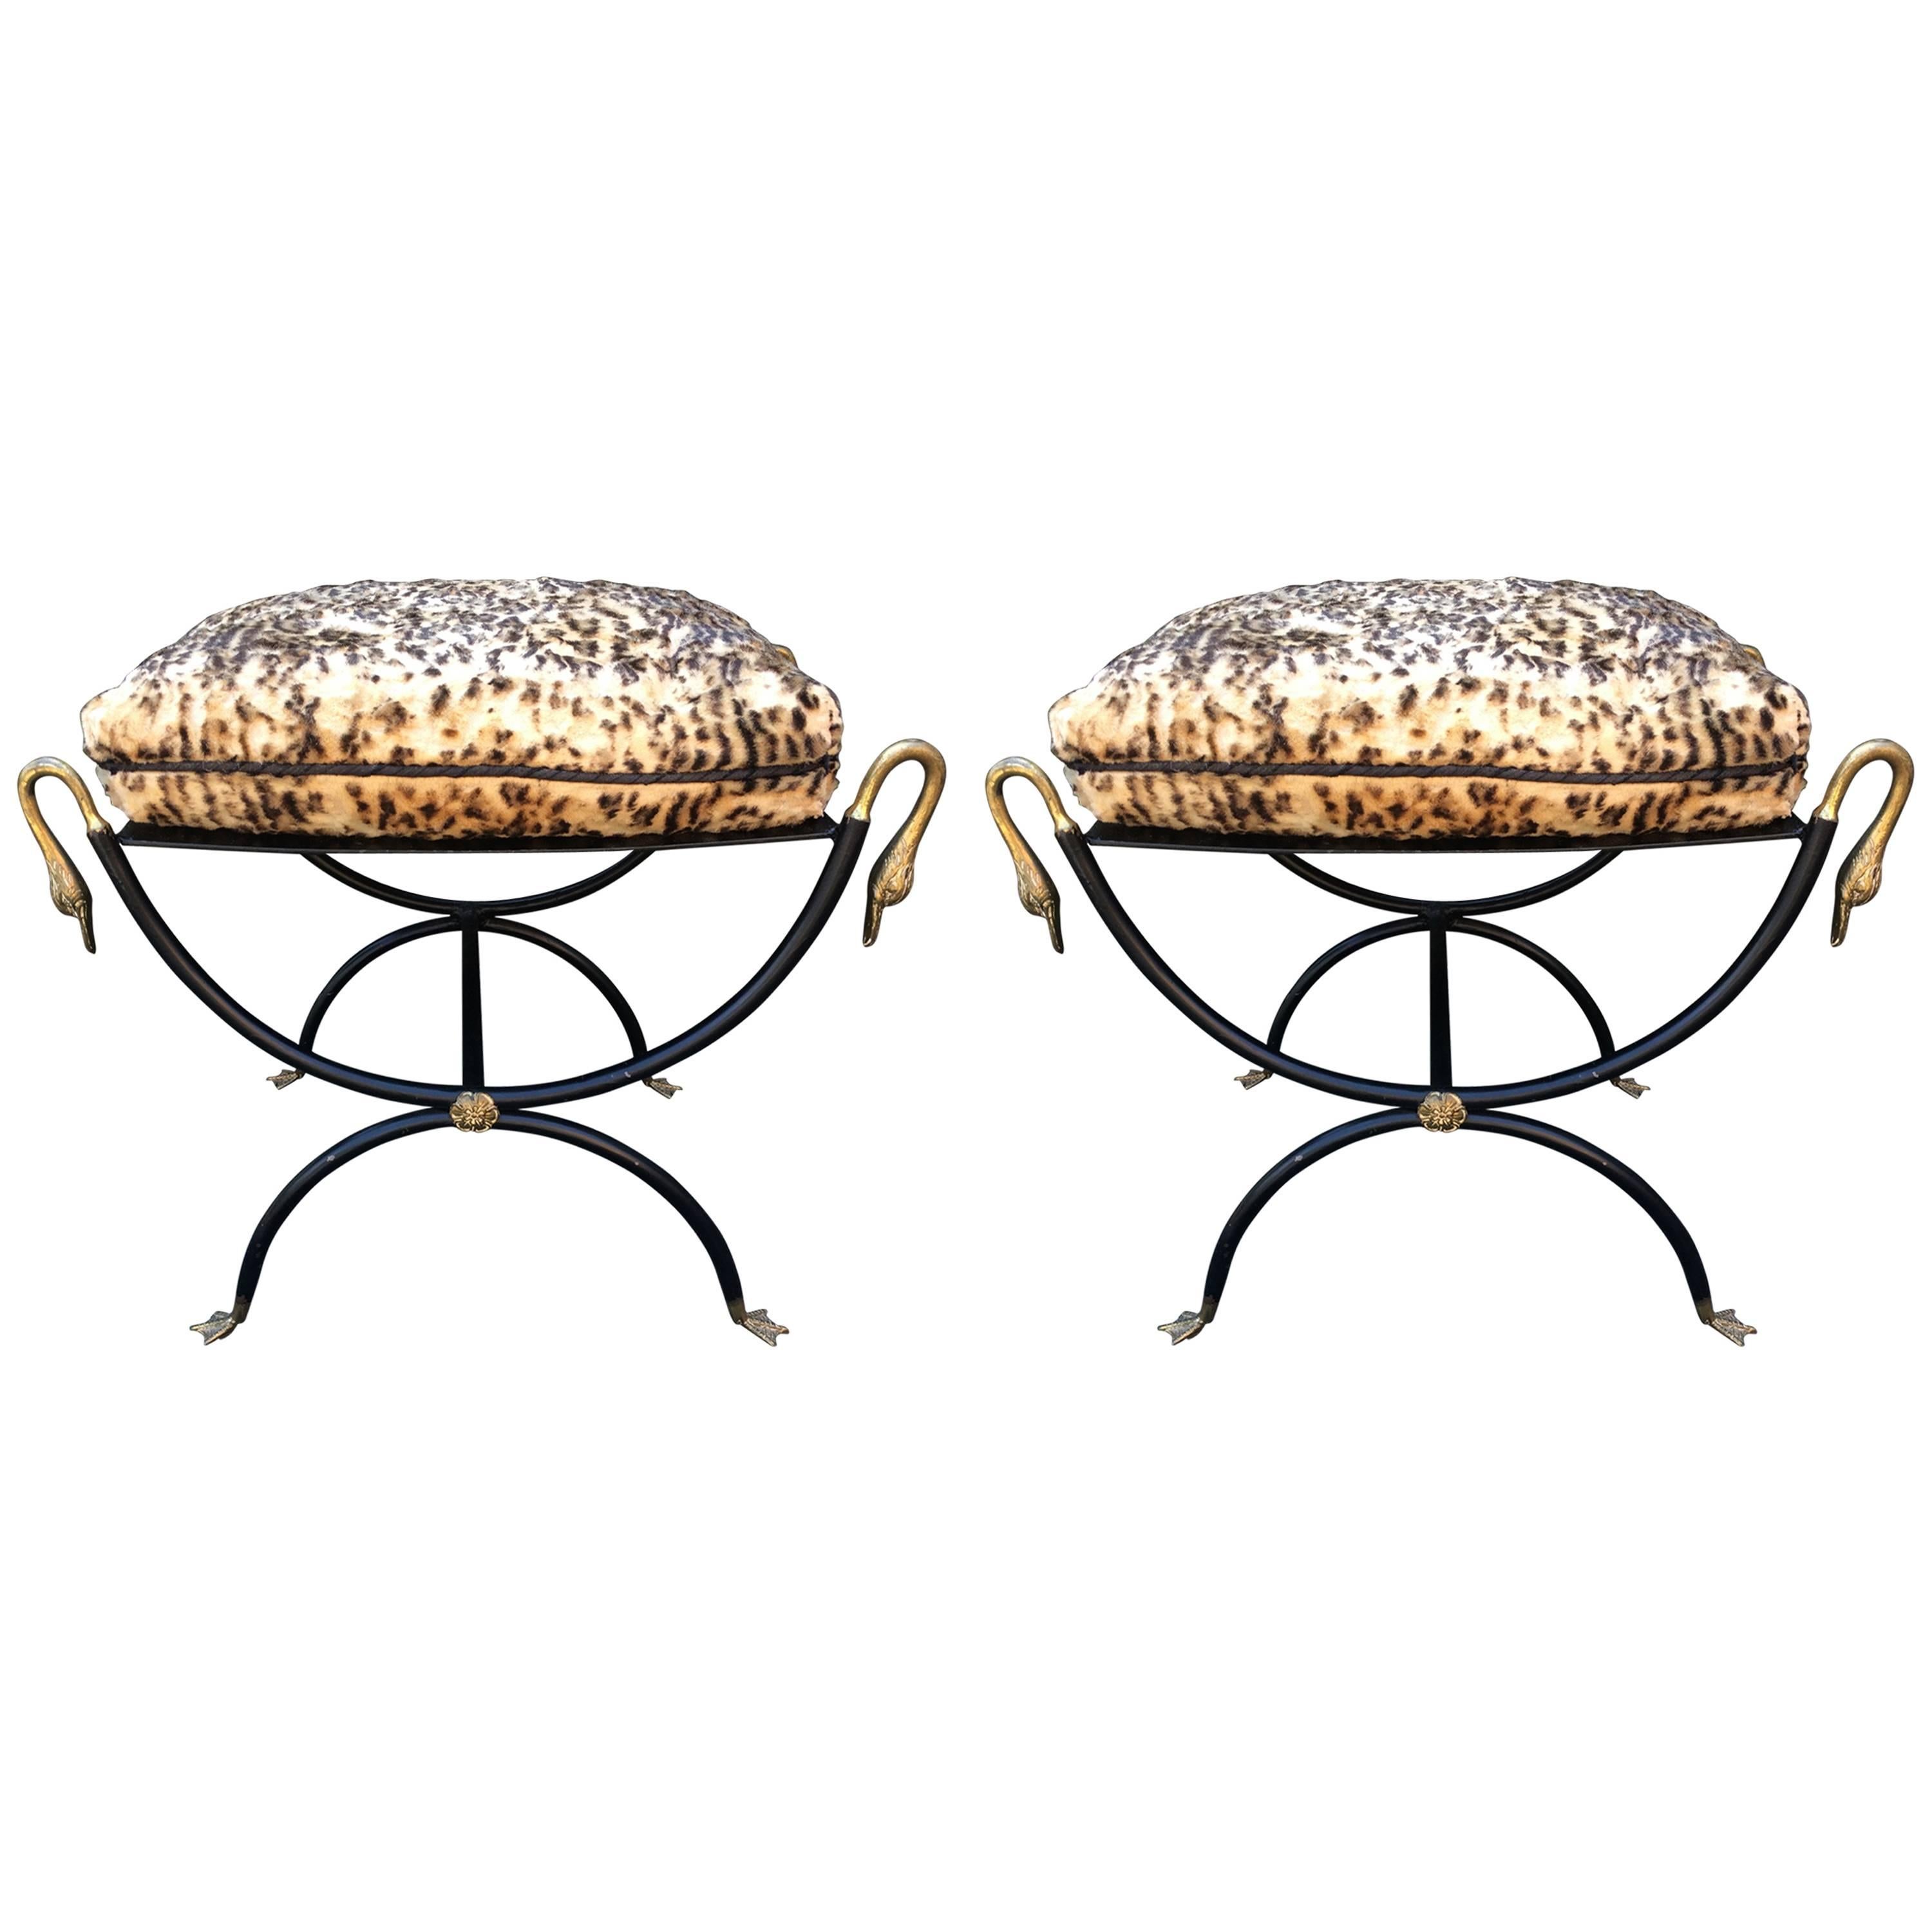 Fantastic Pair of Italian Bronze and Iron Neoclassical Style Ottomans Benches